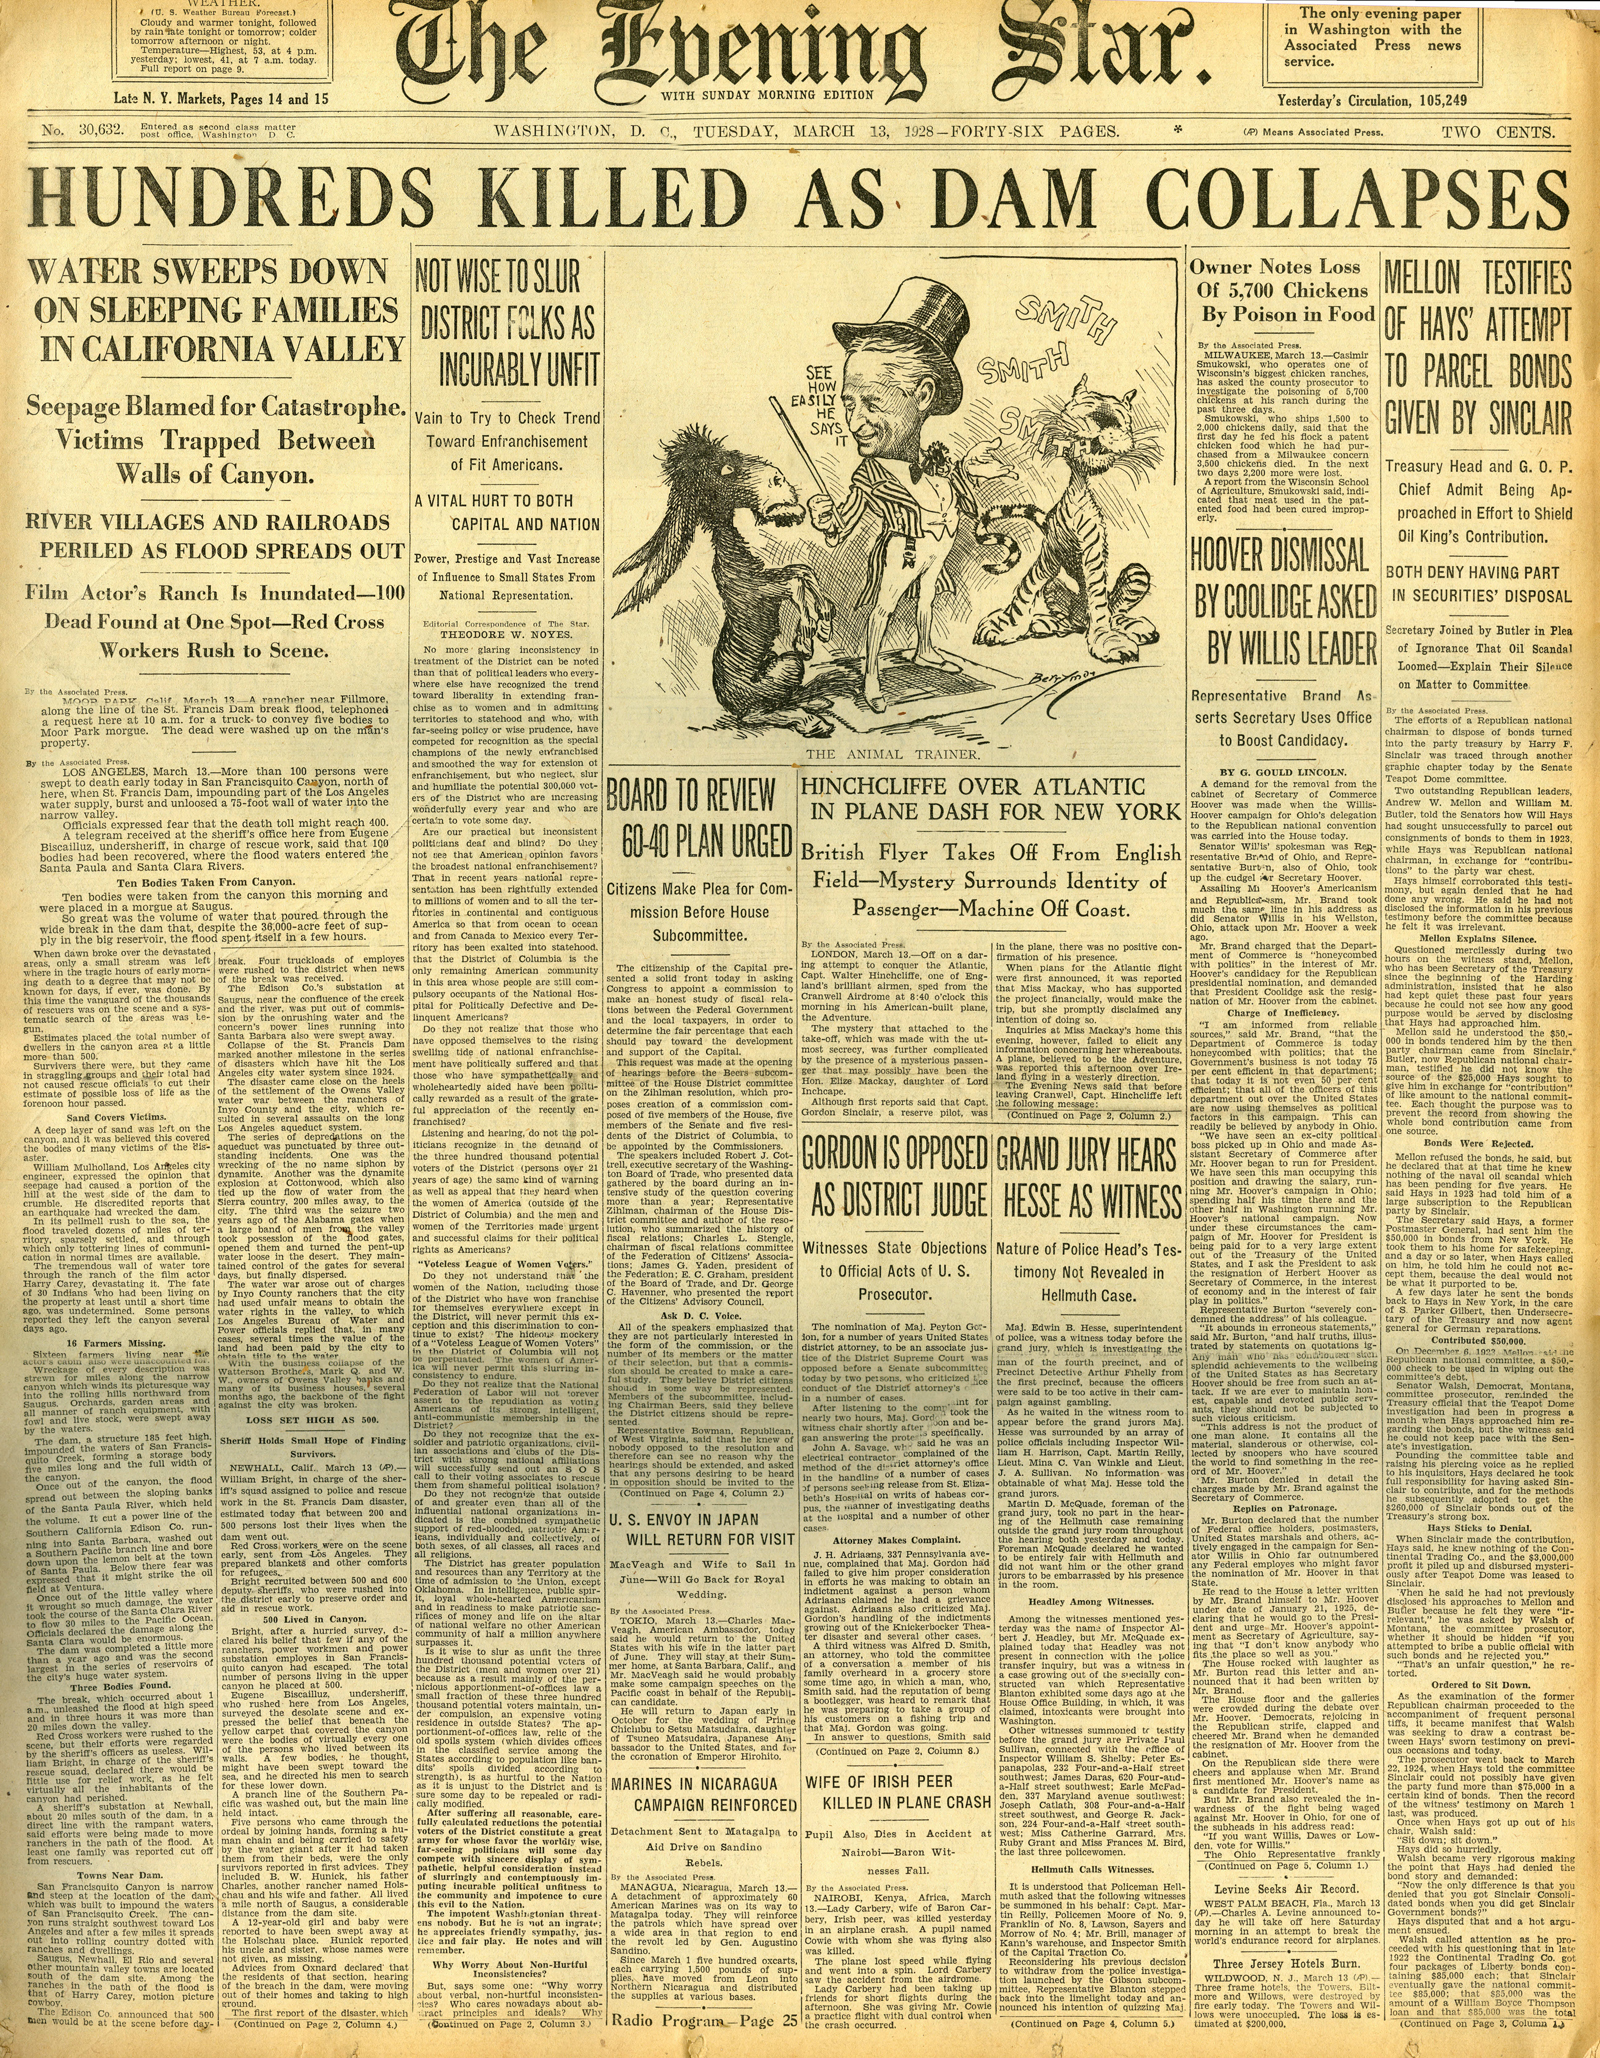 Newspapers of the St. Francis Dam Disaster.

THE EVENING STAR(NEWSPAPER),

TUESDAY, MARCH 13, 1928